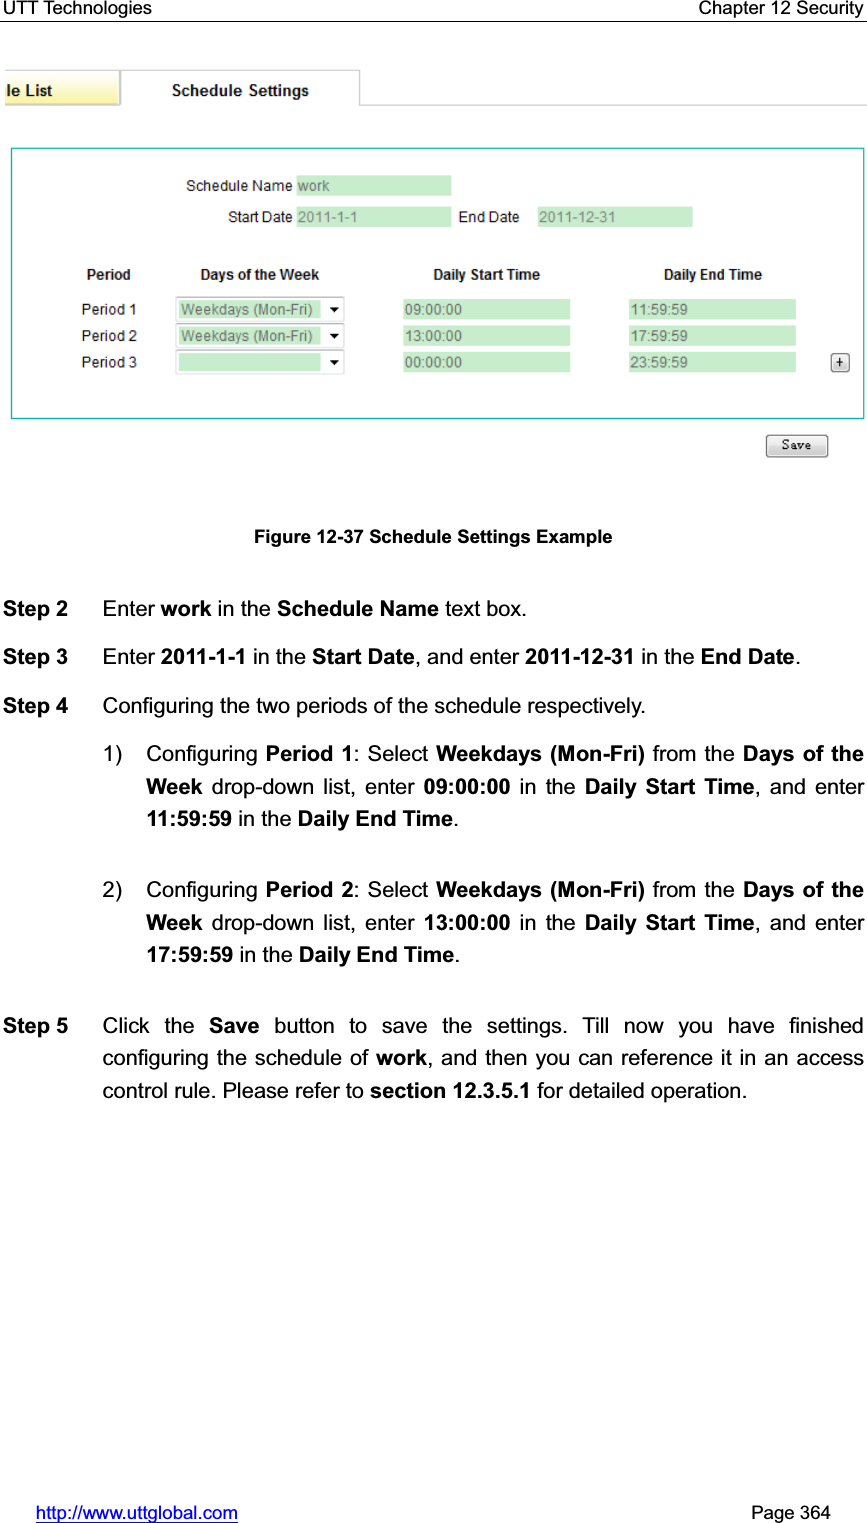 UTT Technologies    Chapter 12 Security   http://www.uttglobal.com                                                       Page 364 Figure 12-37 Schedule Settings Example Step 2  Enter work in the Schedule Name text box. Step 3  Enter 2011-1-1 in the Start Date, and enter 2011-12-31 in the End Date.Step 4  Configuring the two periods of the schedule respectively. 1) Configuring Period 1: Select Weekdays (Mon-Fri) from the Days of the Week drop-down list, enter 09:00:00 in the Daily Start Time, and enter 11:59:59 in the Daily End Time.2) Configuring Period 2: Select Weekdays (Mon-Fri) from the Days of the Week drop-down list, enter 13:00:00 in the Daily Start Time, and enter 17:59:59 in the Daily End Time.Step 5  Click the Save button to save the settings. Till now you have finished configuring the schedule of work, and then you can reference it in an access control rule. Please refer to section 12.3.5.1 for detailed operation. 